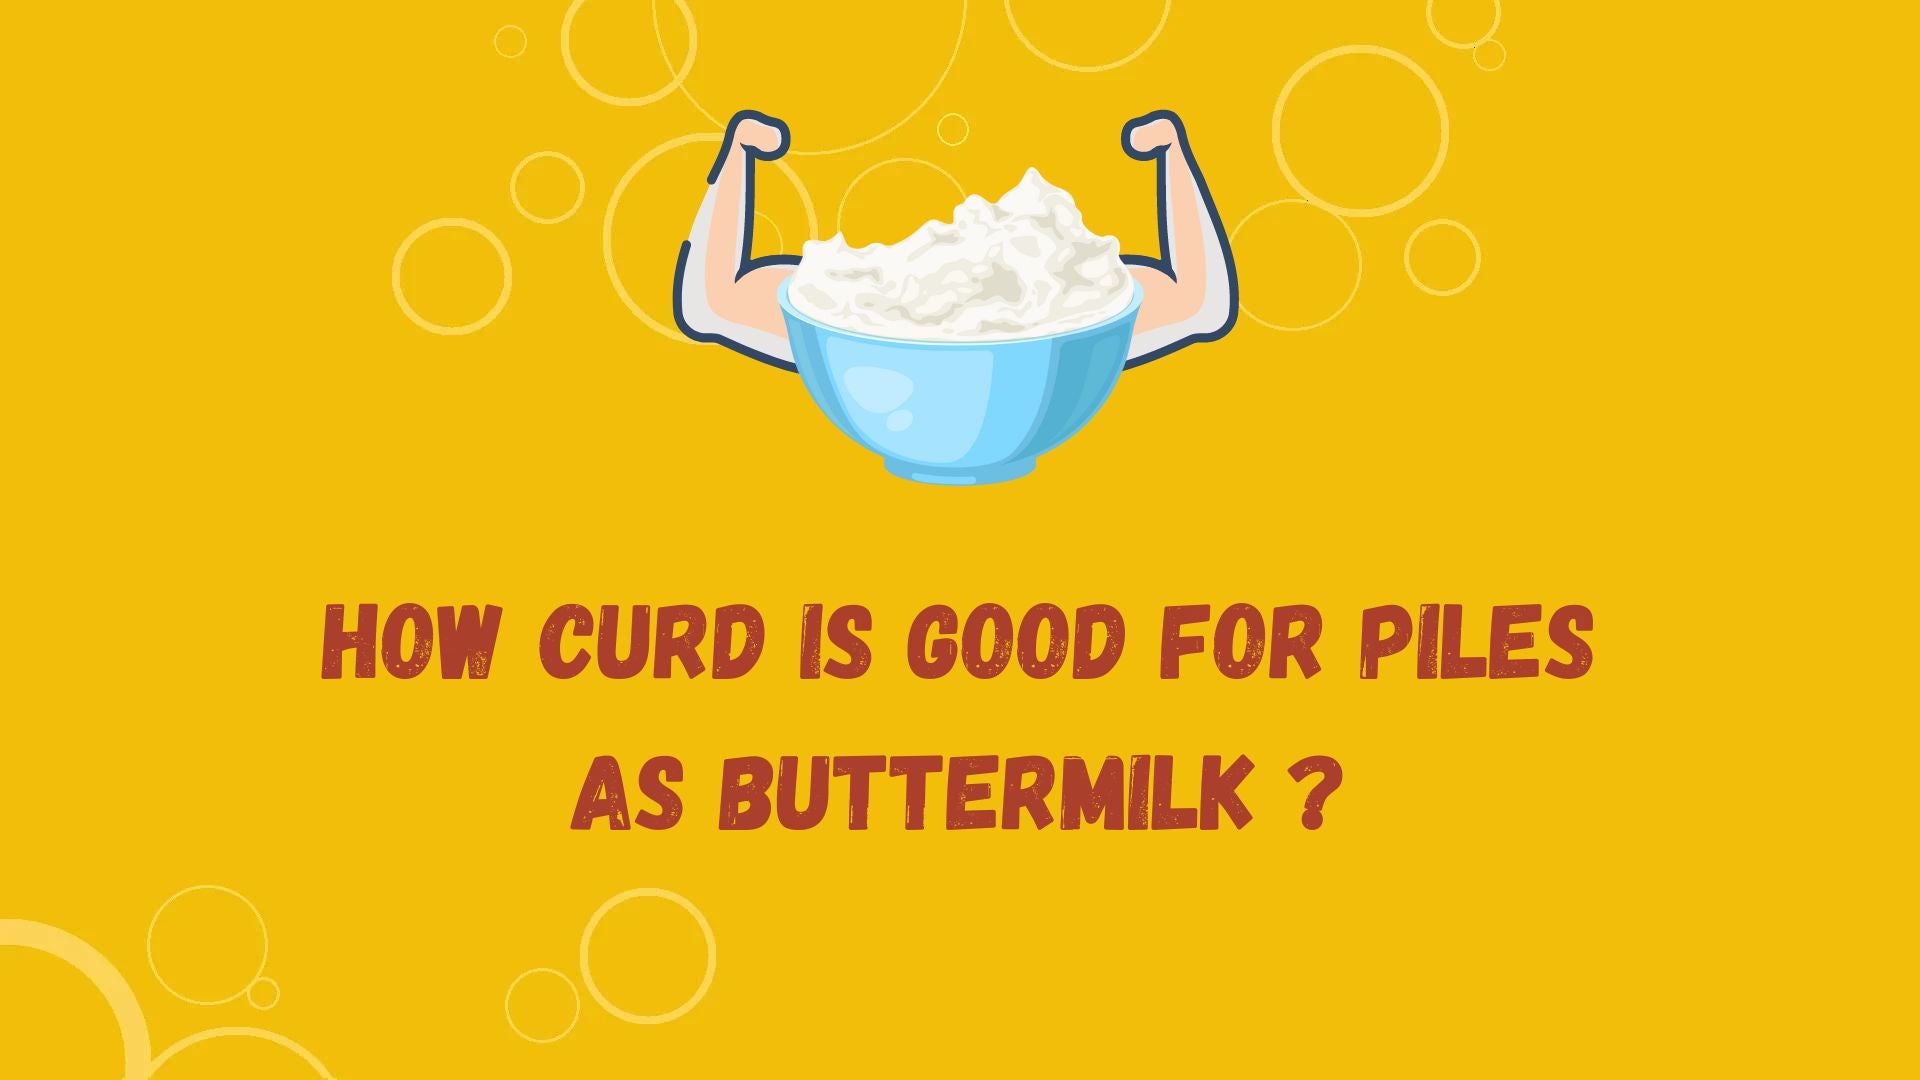 How curd is good for piles as buttermilk